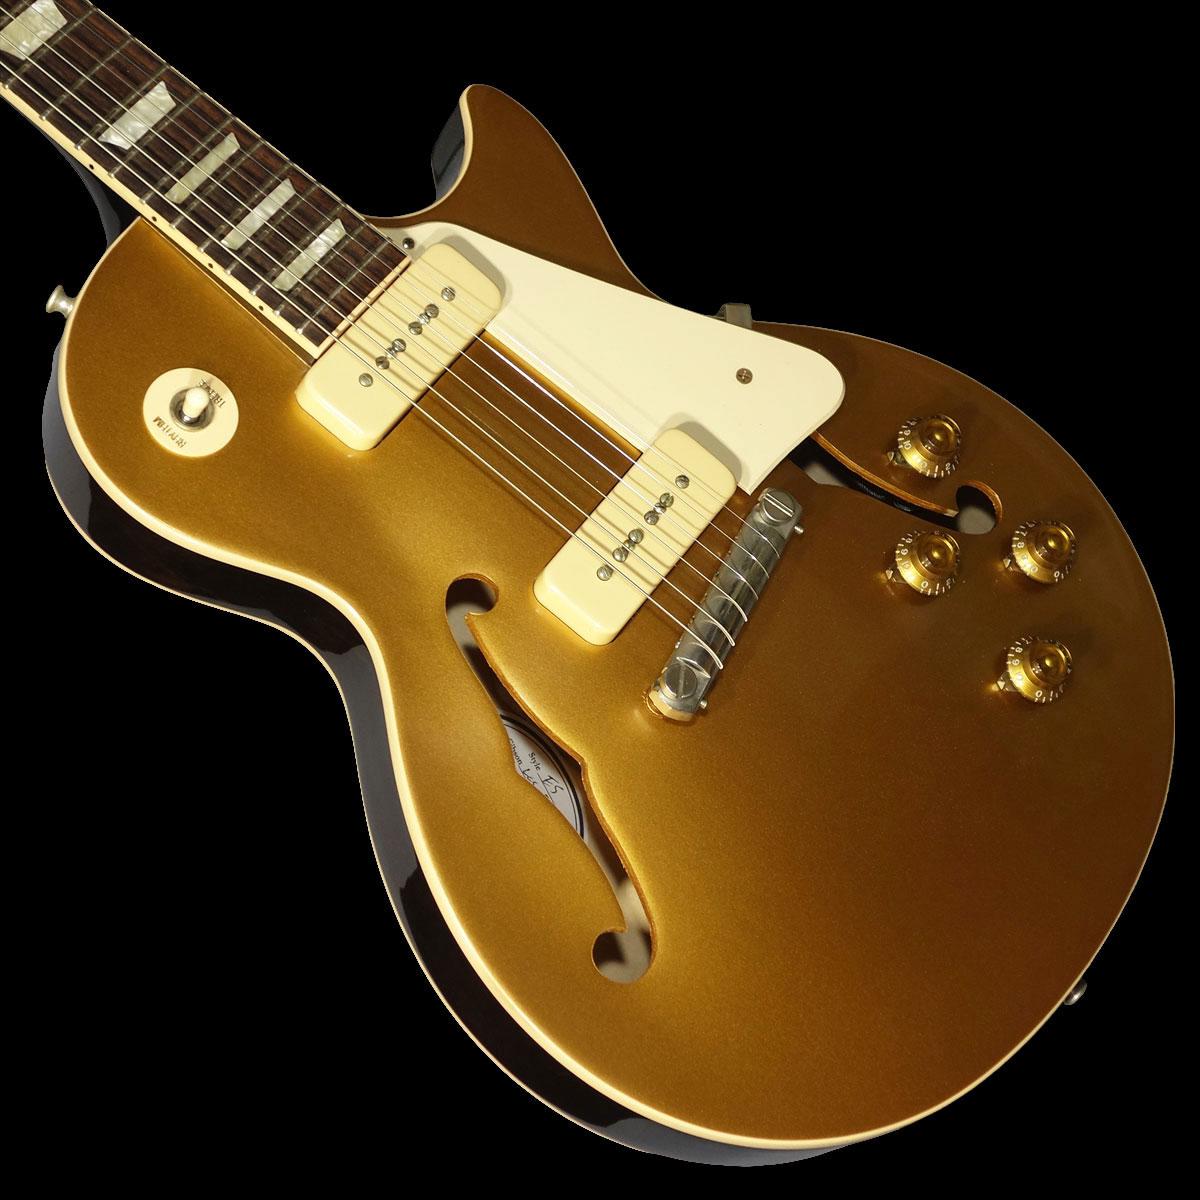 Gibson Memphis Limited Edition Es Les Paul P 90 Gold Top Wrap Around Vos アウトレット特価 ギブソン メンフィス 平野楽器 ロッキン オンラインストア